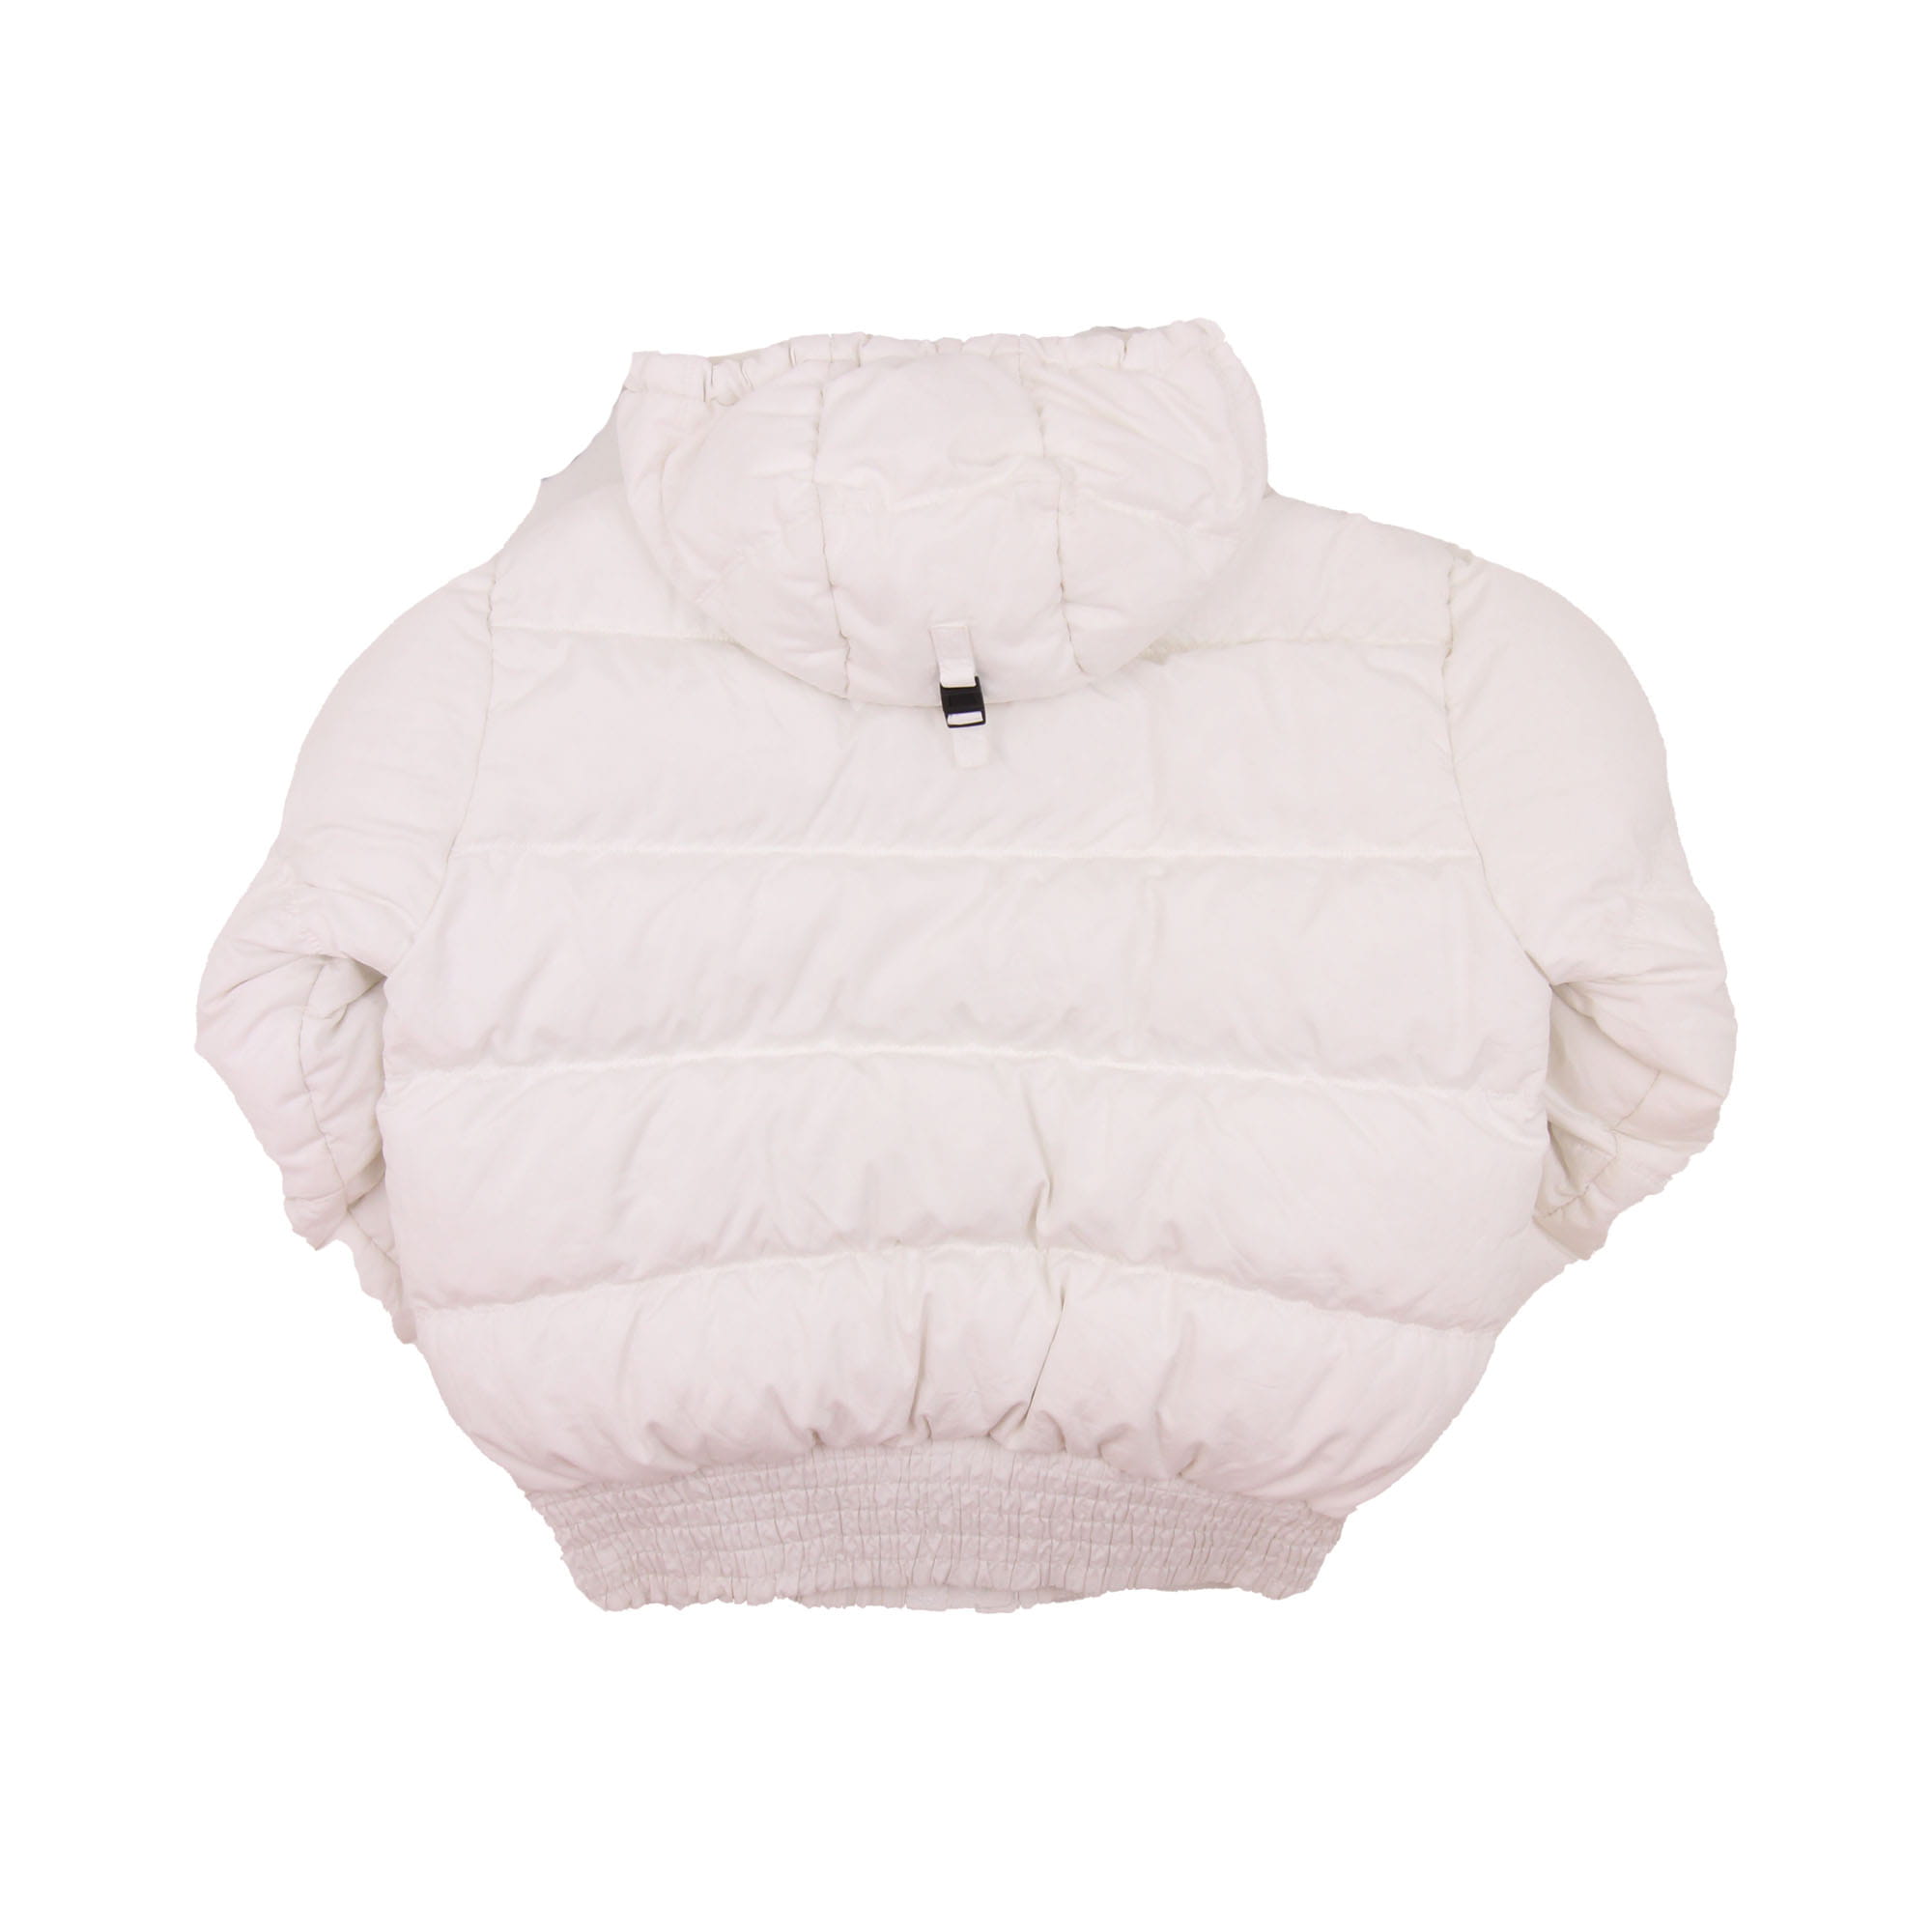 Nike Embroidered Logo Puffer Jacket -  S/M